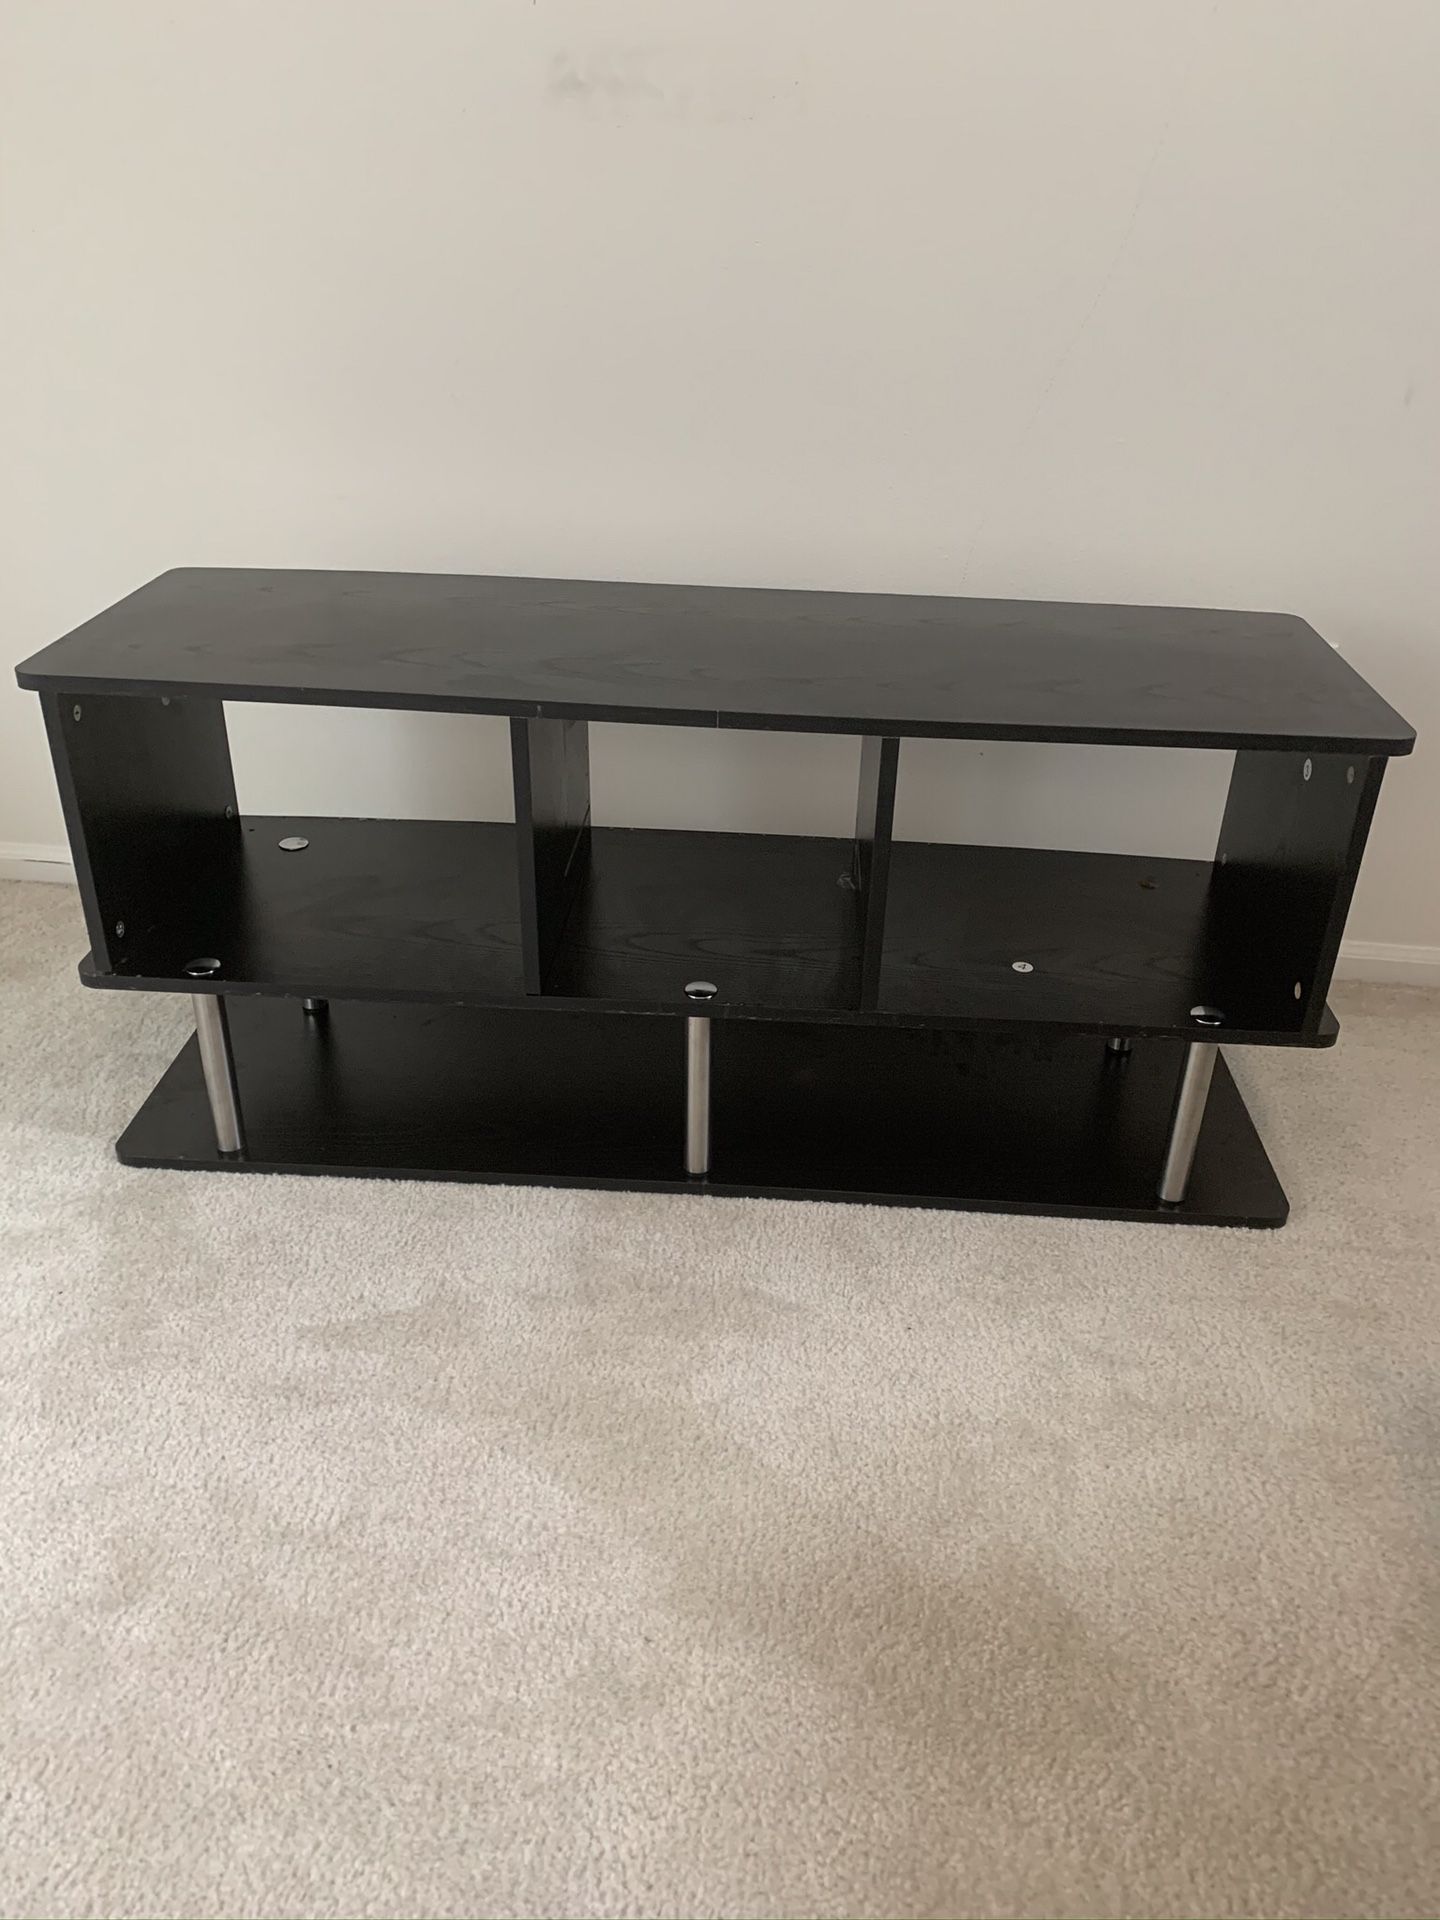 Entertainment Stand/TV Stand $50 OBO